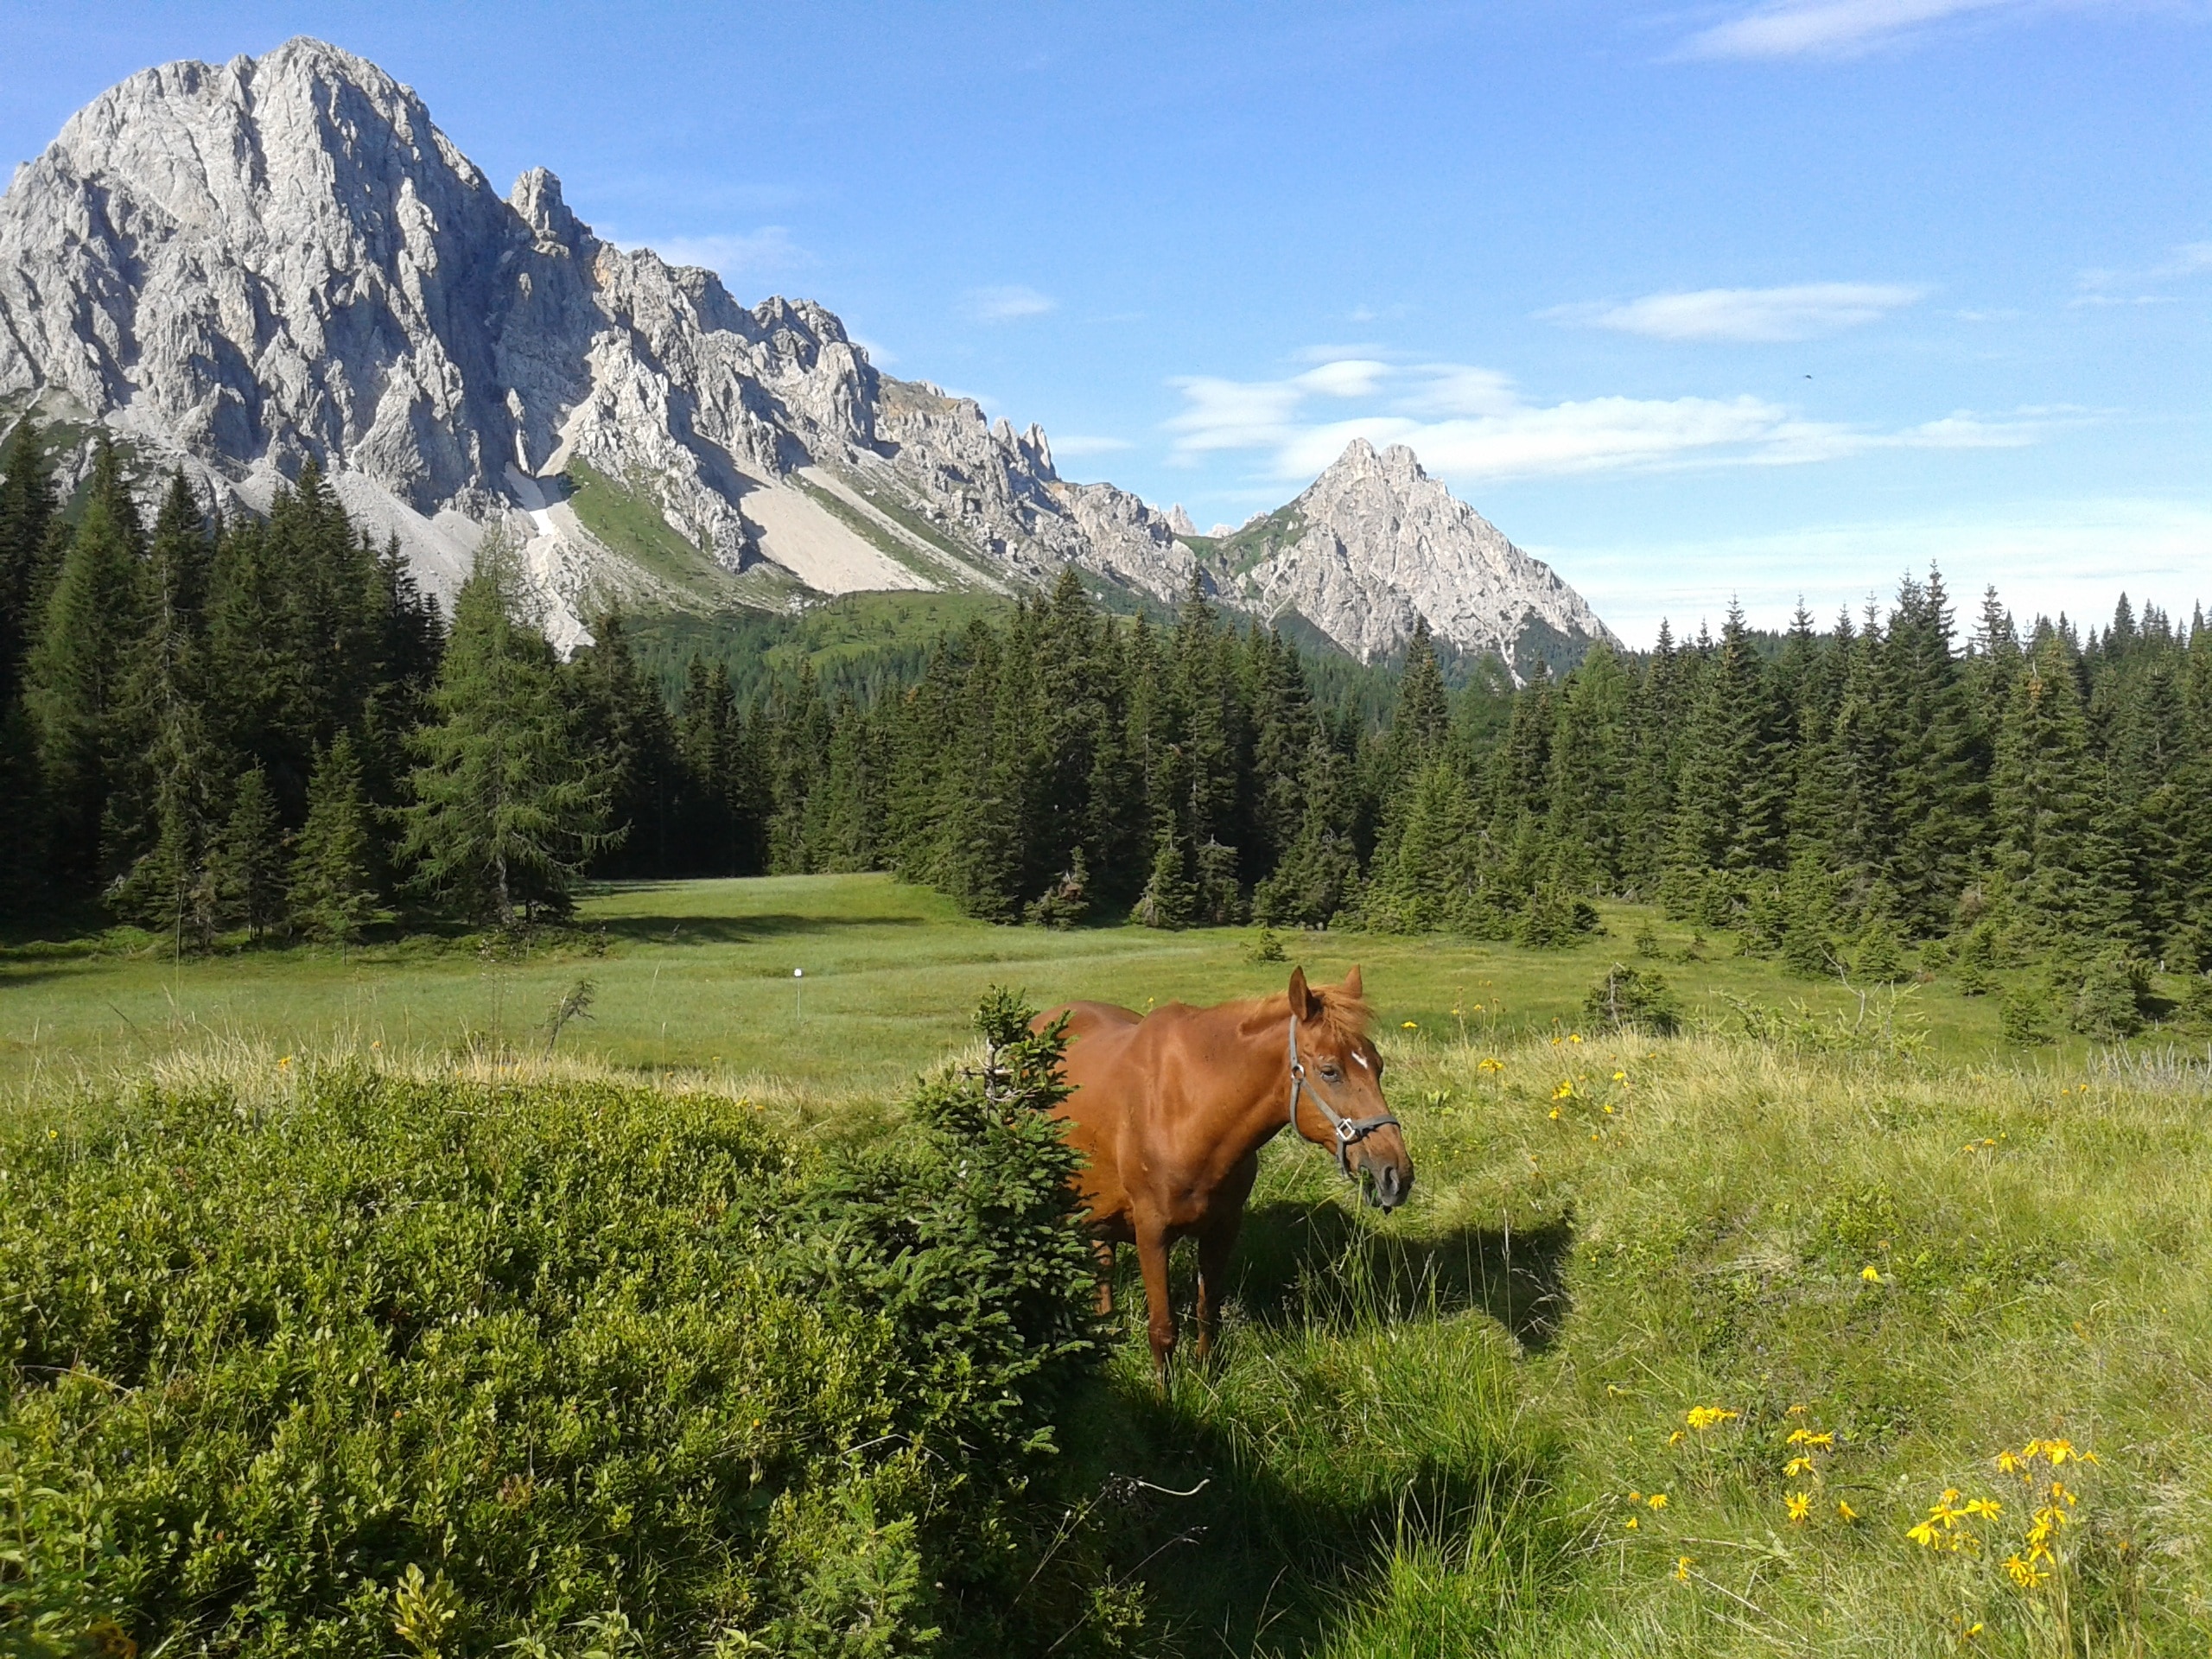 brown horse on field with green leaf trees and plants near mountain with rocks